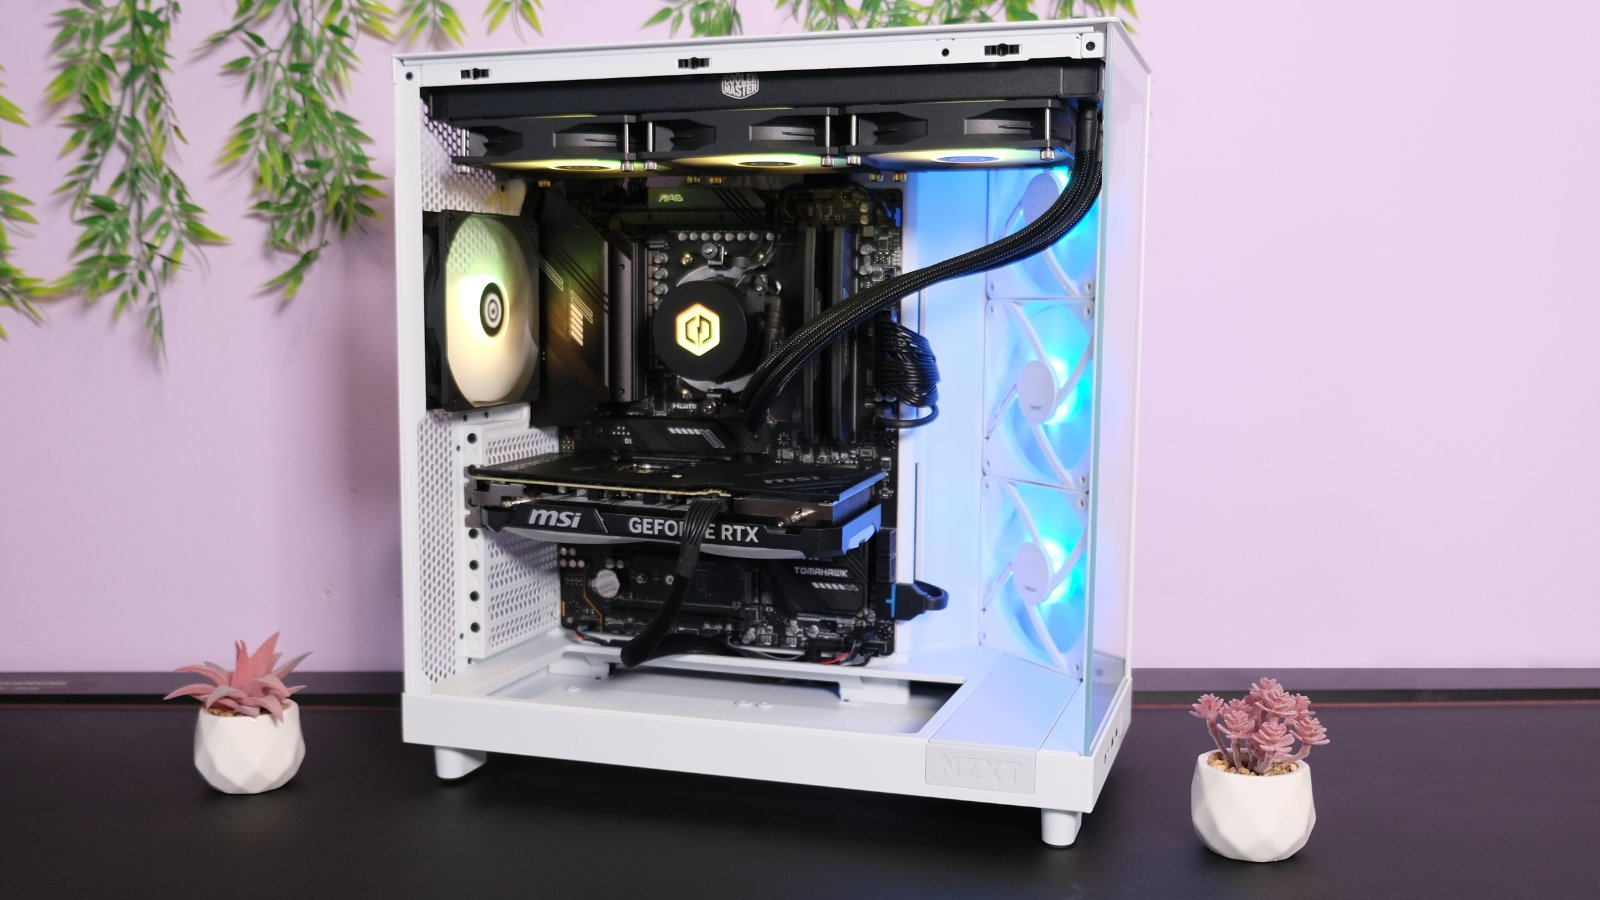 CyberpowerPC UK Ultra R77 3DS looks gorgeous with RGB lighting shining against the white case.